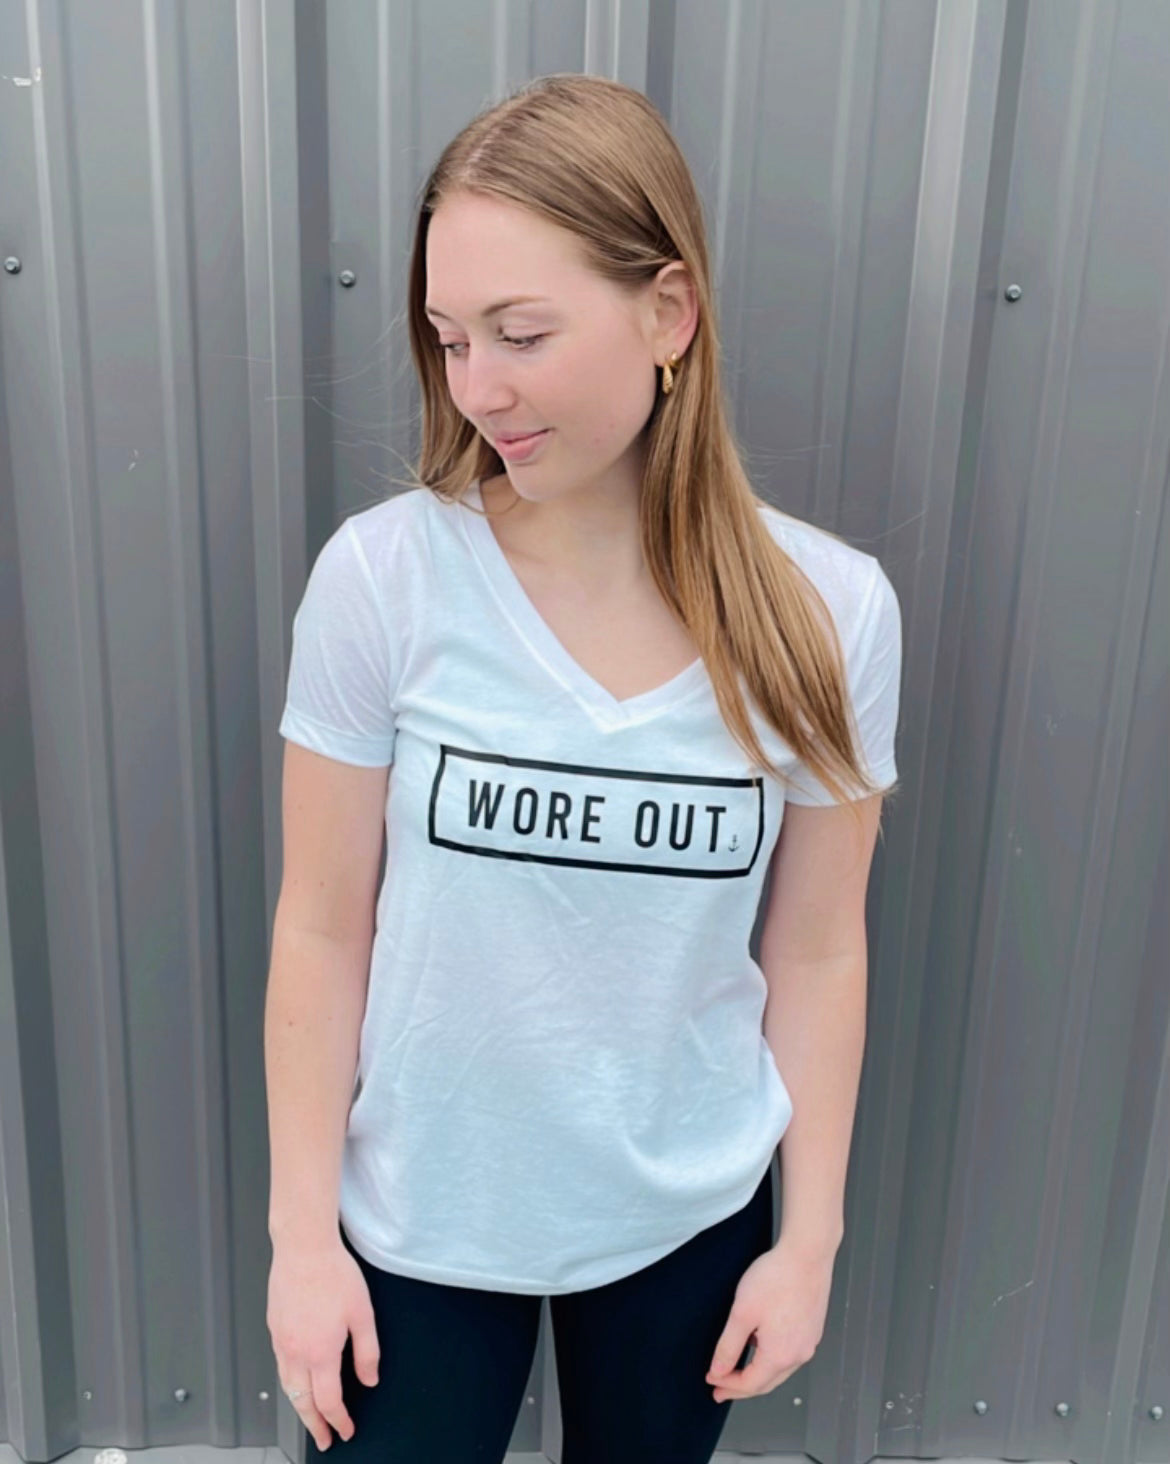 "Wore Out" T-Shirt